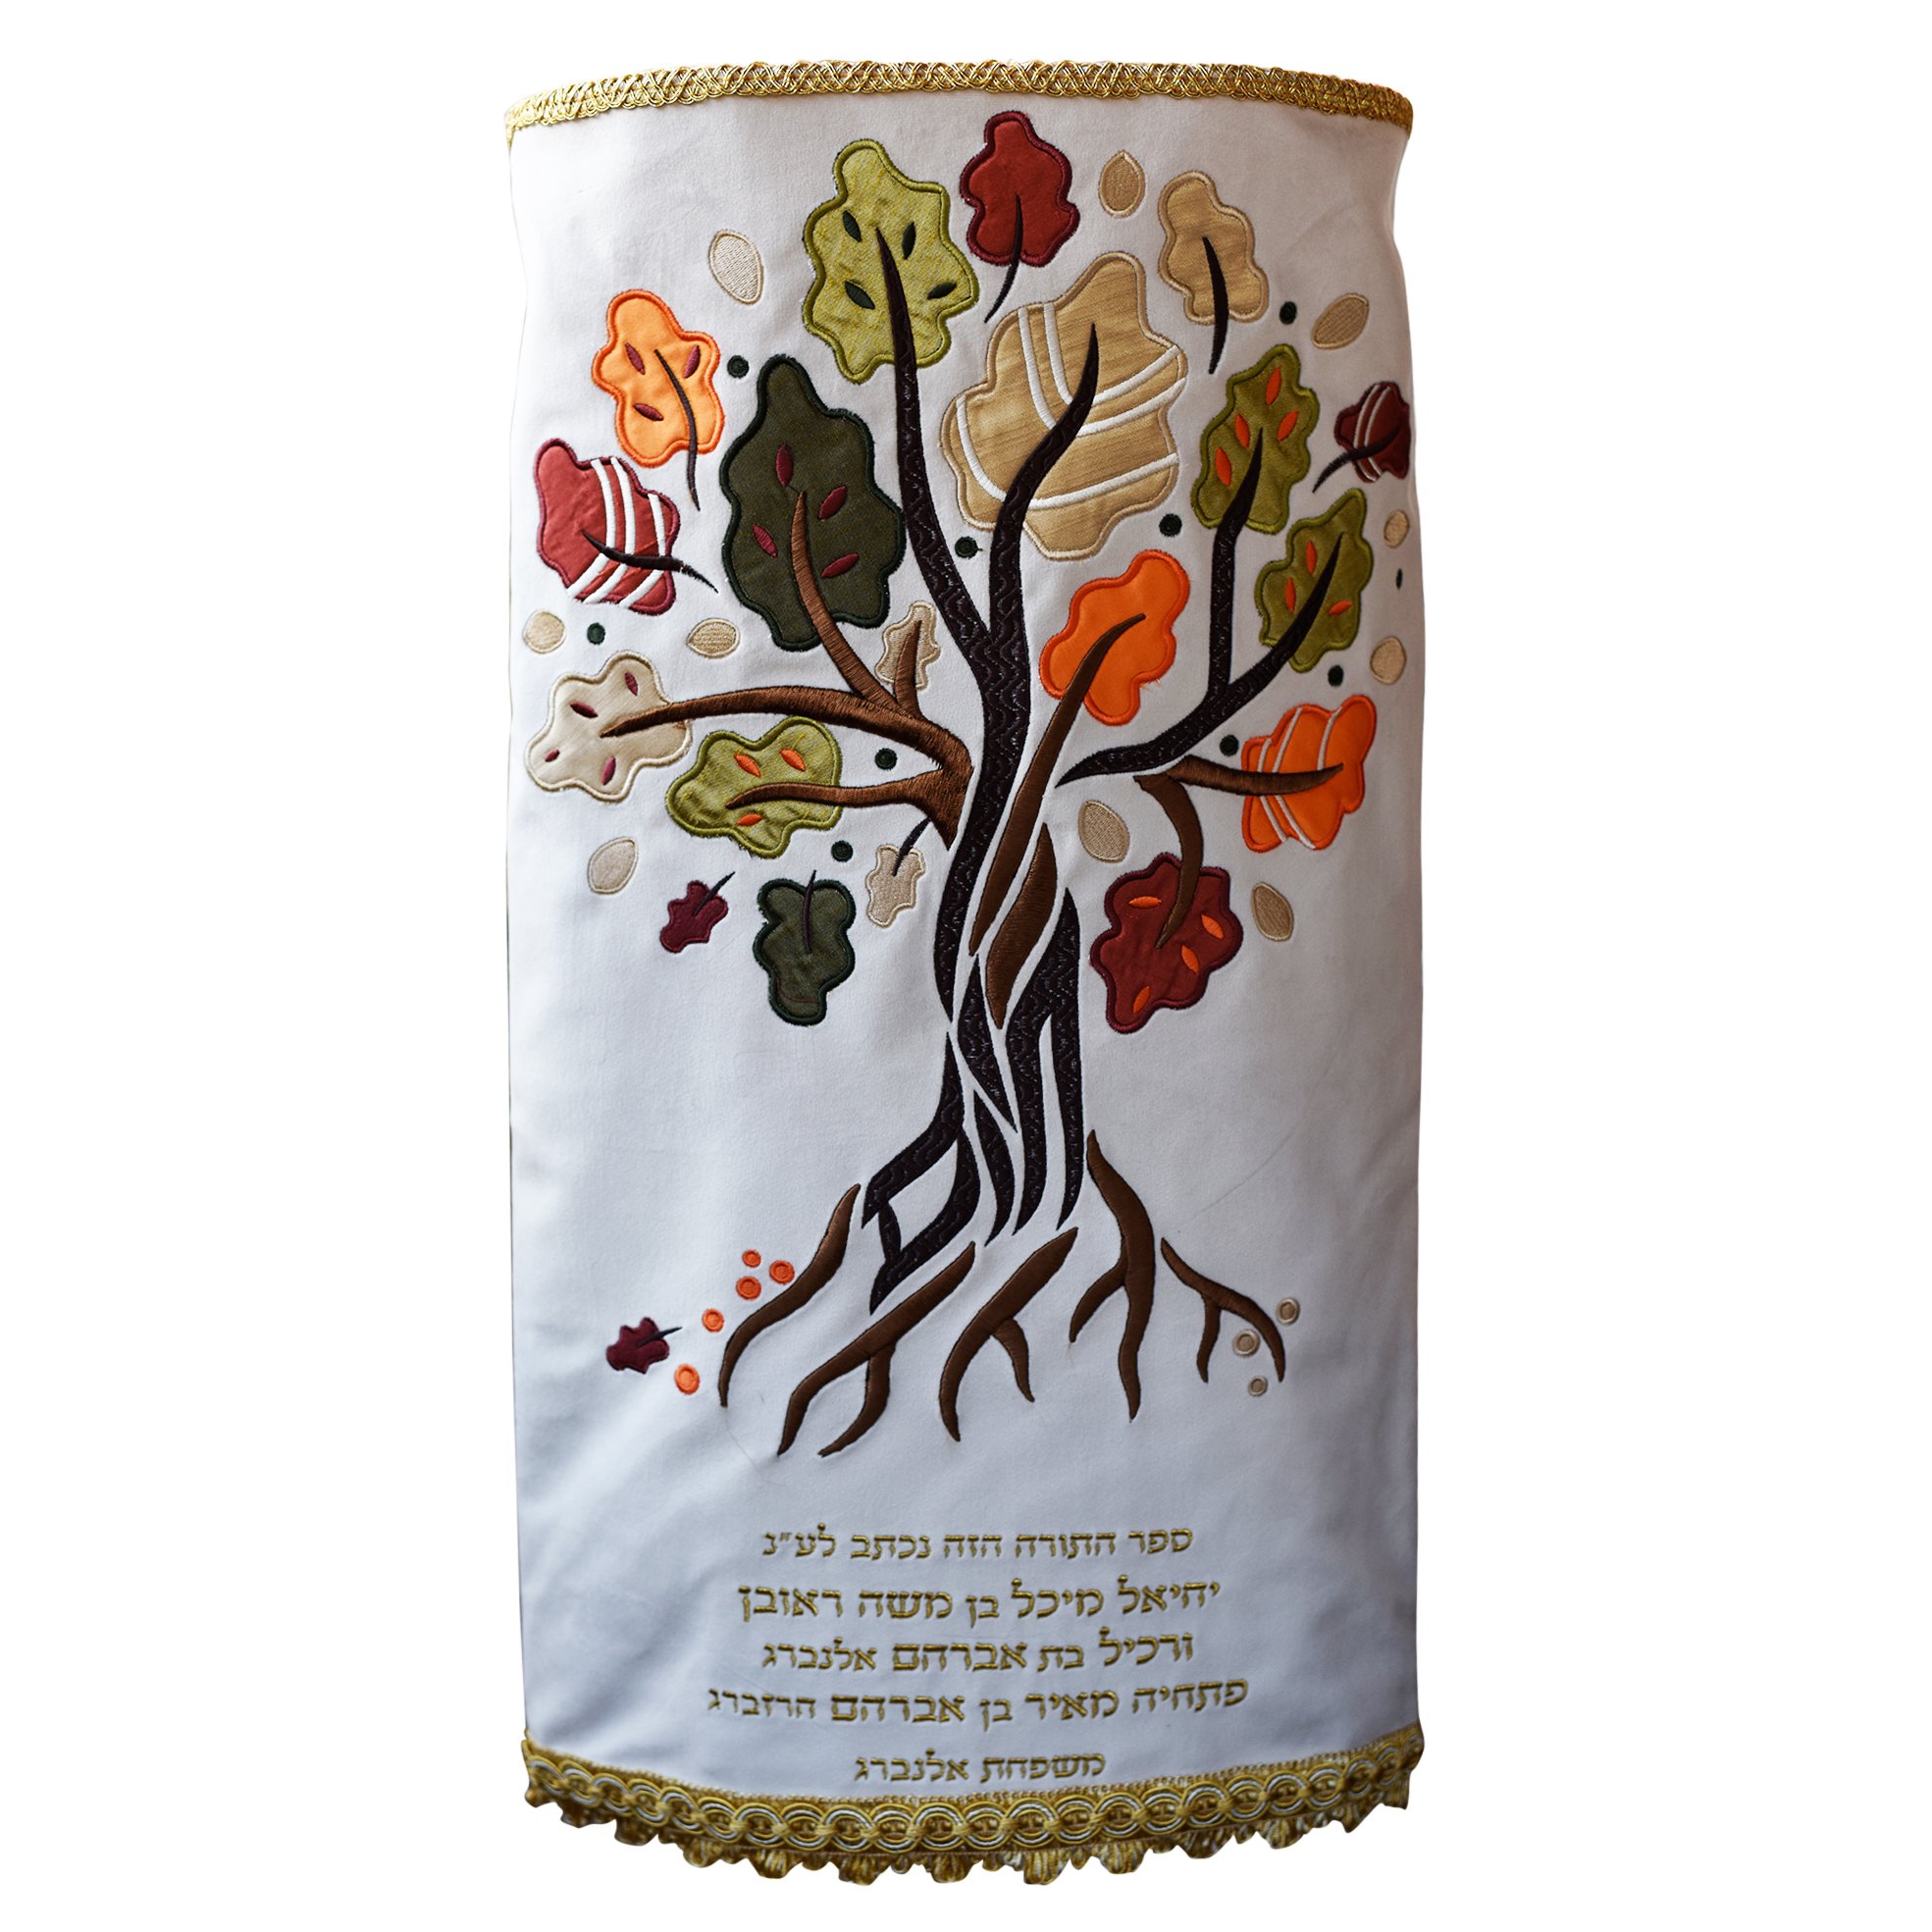   Chana Gamliel's Torah Mantel, adorned with a majestic tree motif, radiates elegance and tradition. Crafted from pristine white fabric, the Mantel exudes purity and reverence, elevating the sanctity of the Torah. Chana Gamliel's meticulous attention